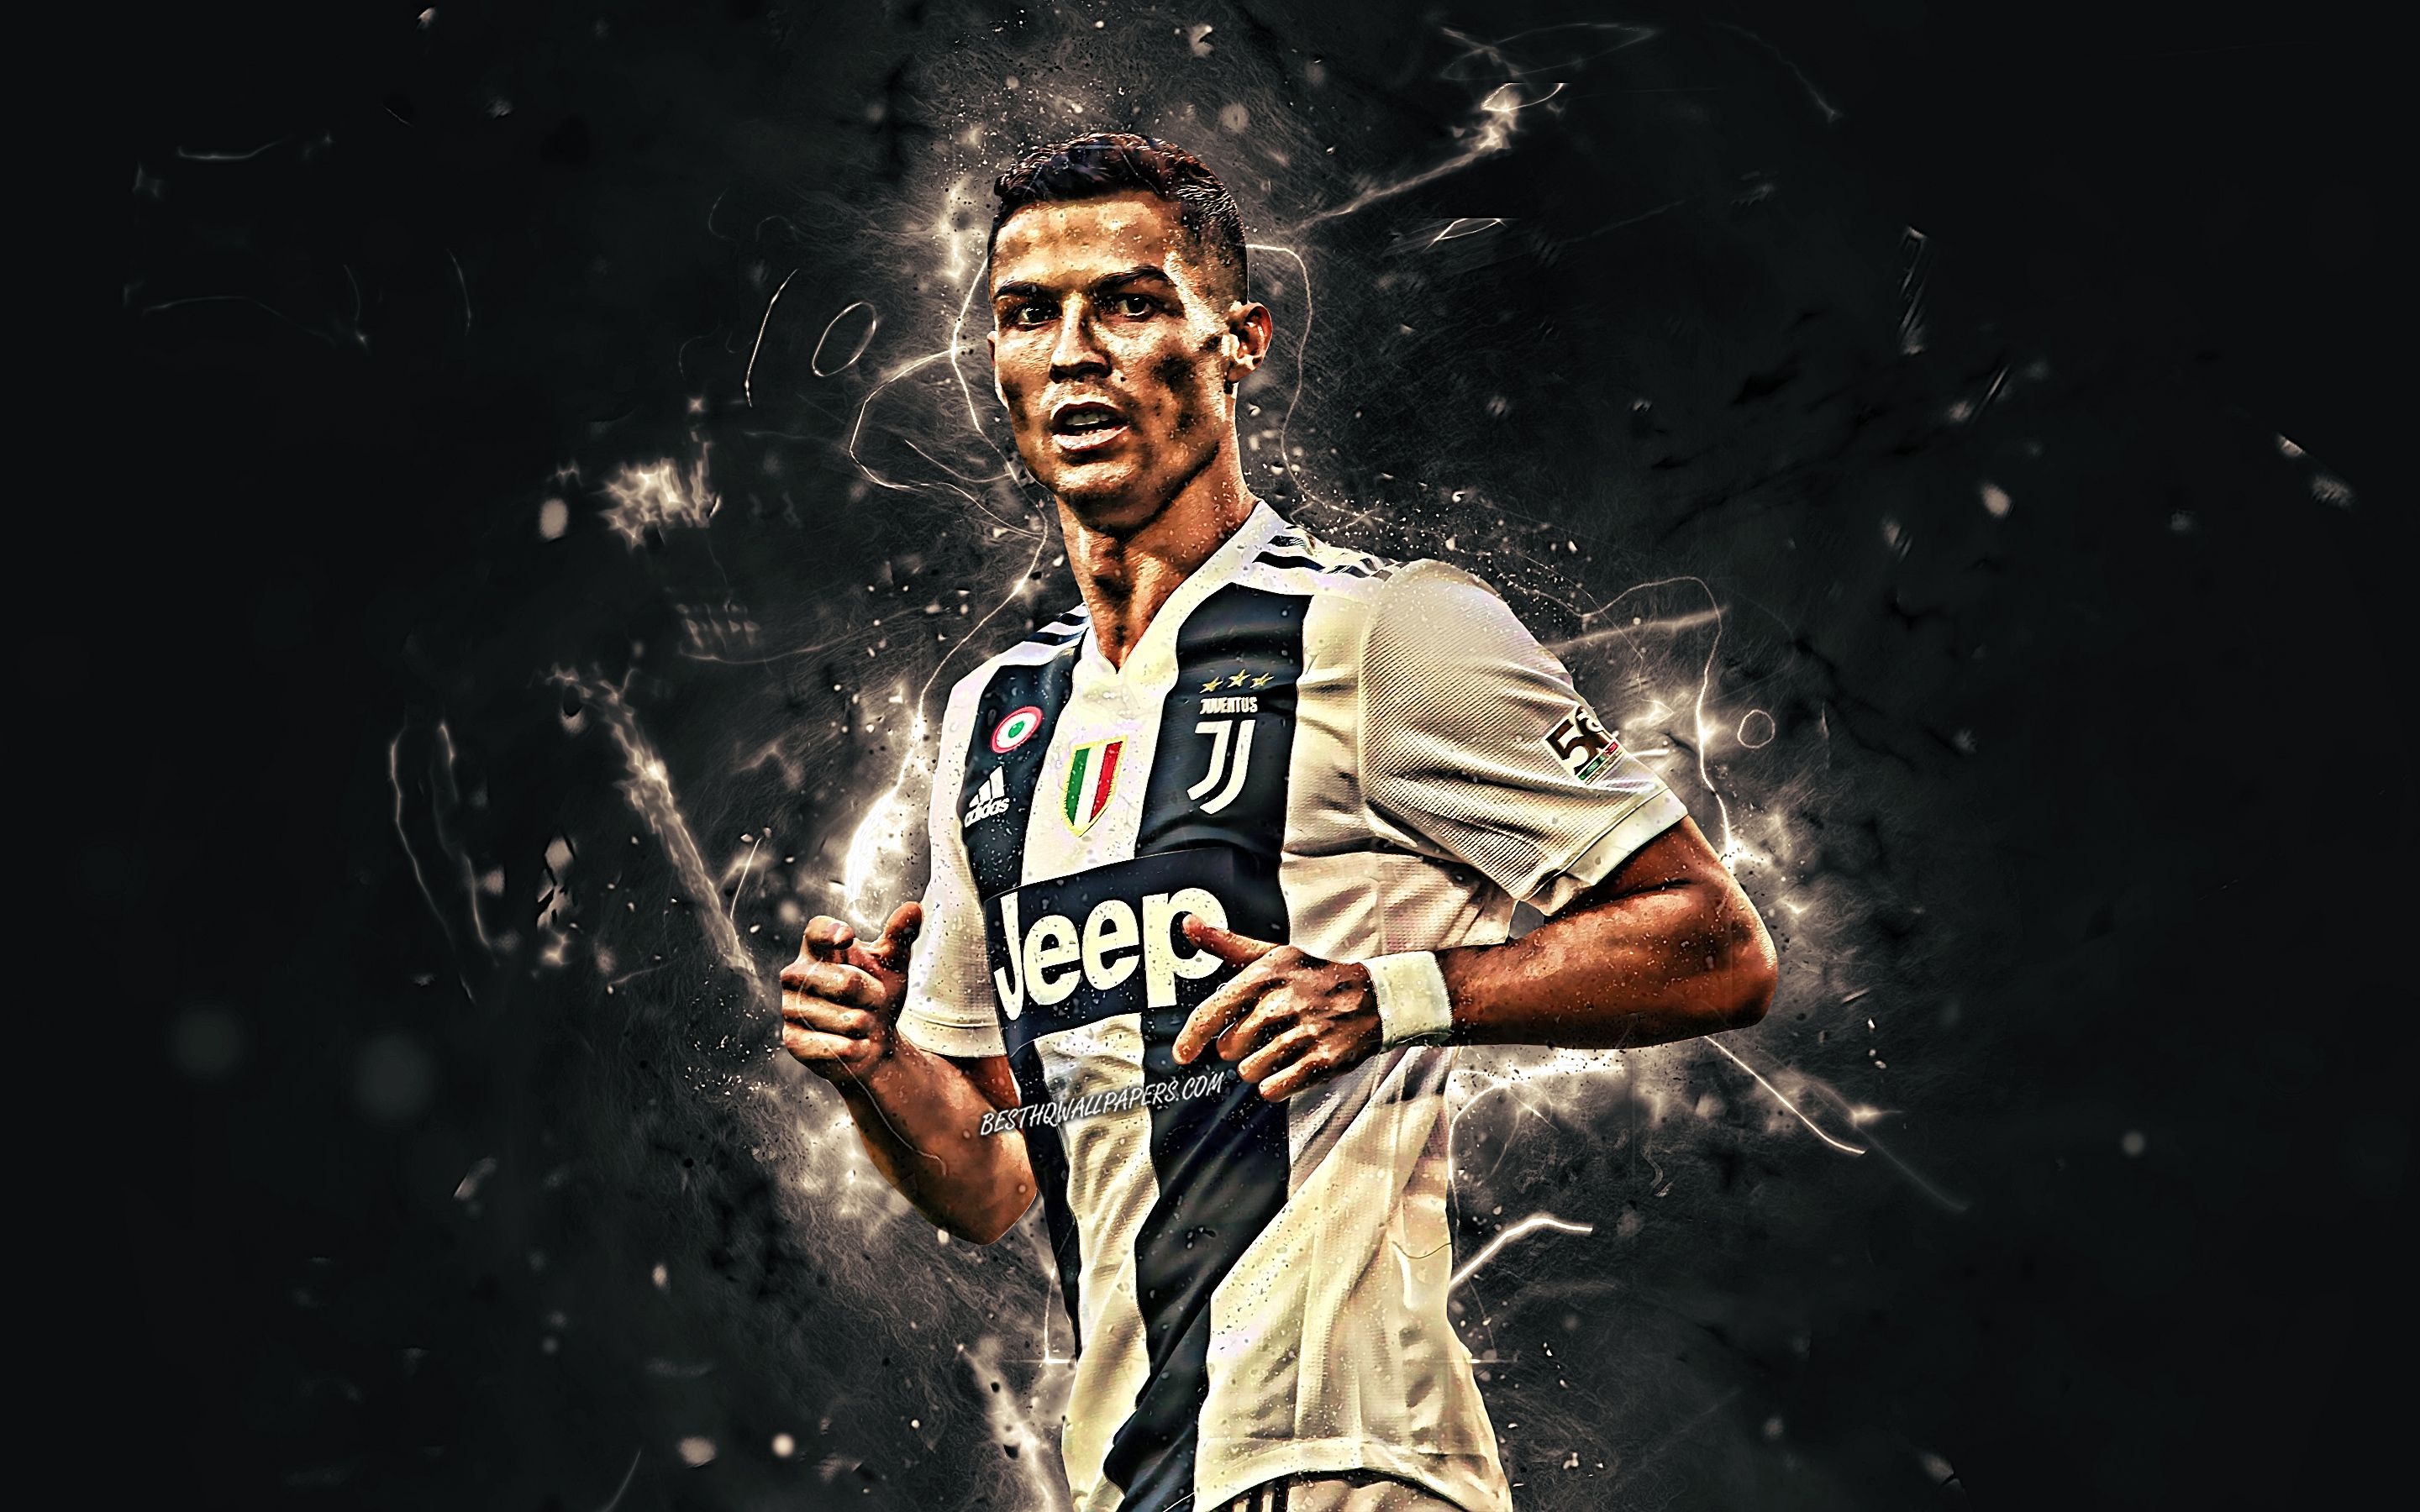 Download Wallpaper Ronaldo, Close Up, Juventus FC, CR7 Juve, Bianconeri, Portuguese Footballers, Abstract Art, Soccer, Serie A, Striker, Cristiano Ronaldo, Neon Lights, CR7 For Desktop With Resolution 2880x1800. High Quality HD Picture Wallpaper